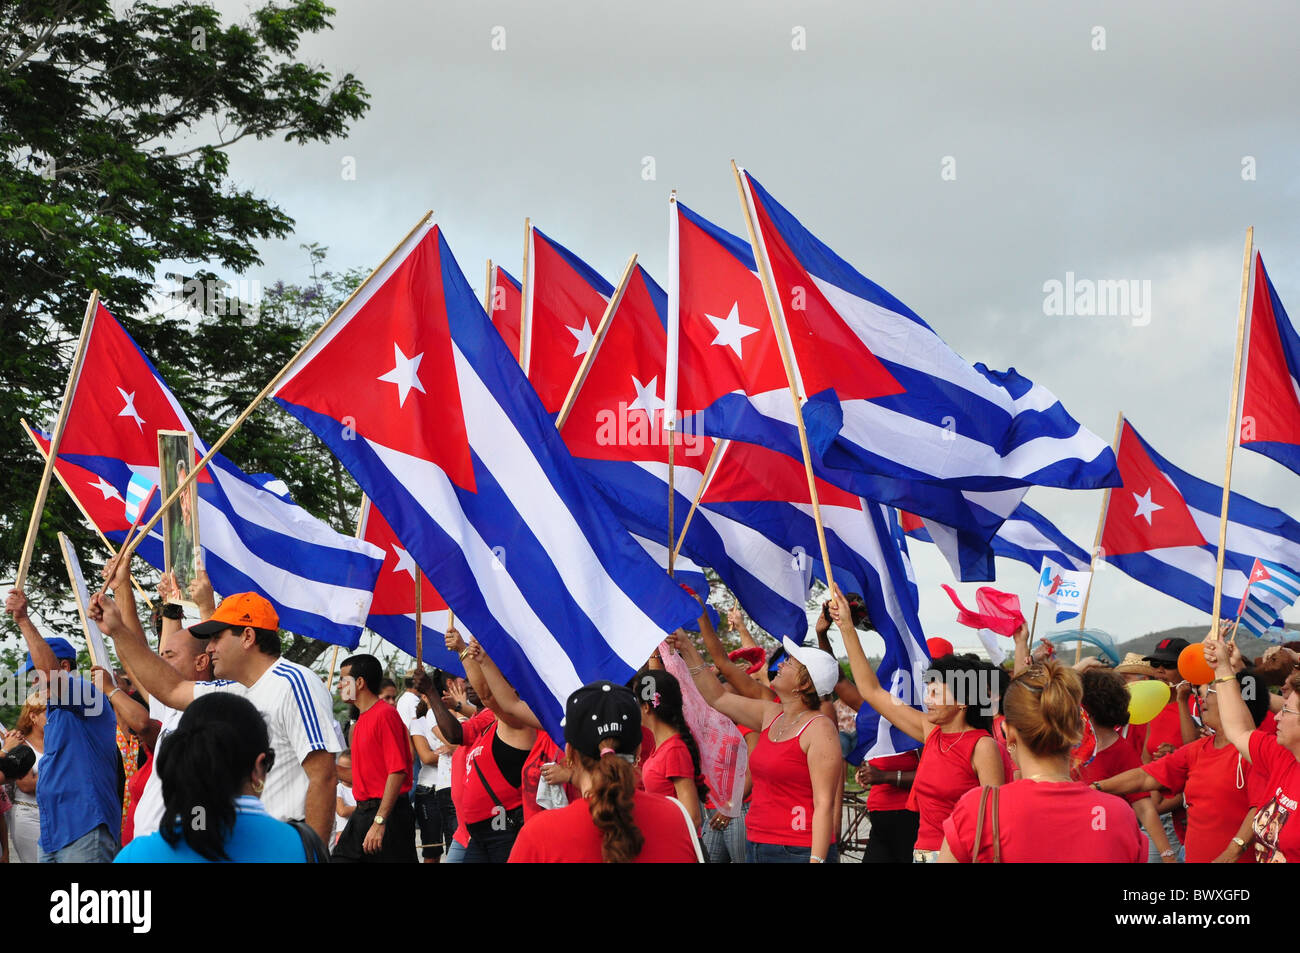 Cuban flags waving at the celebrations of 50 years since the Cuban Revolution Stock Photo